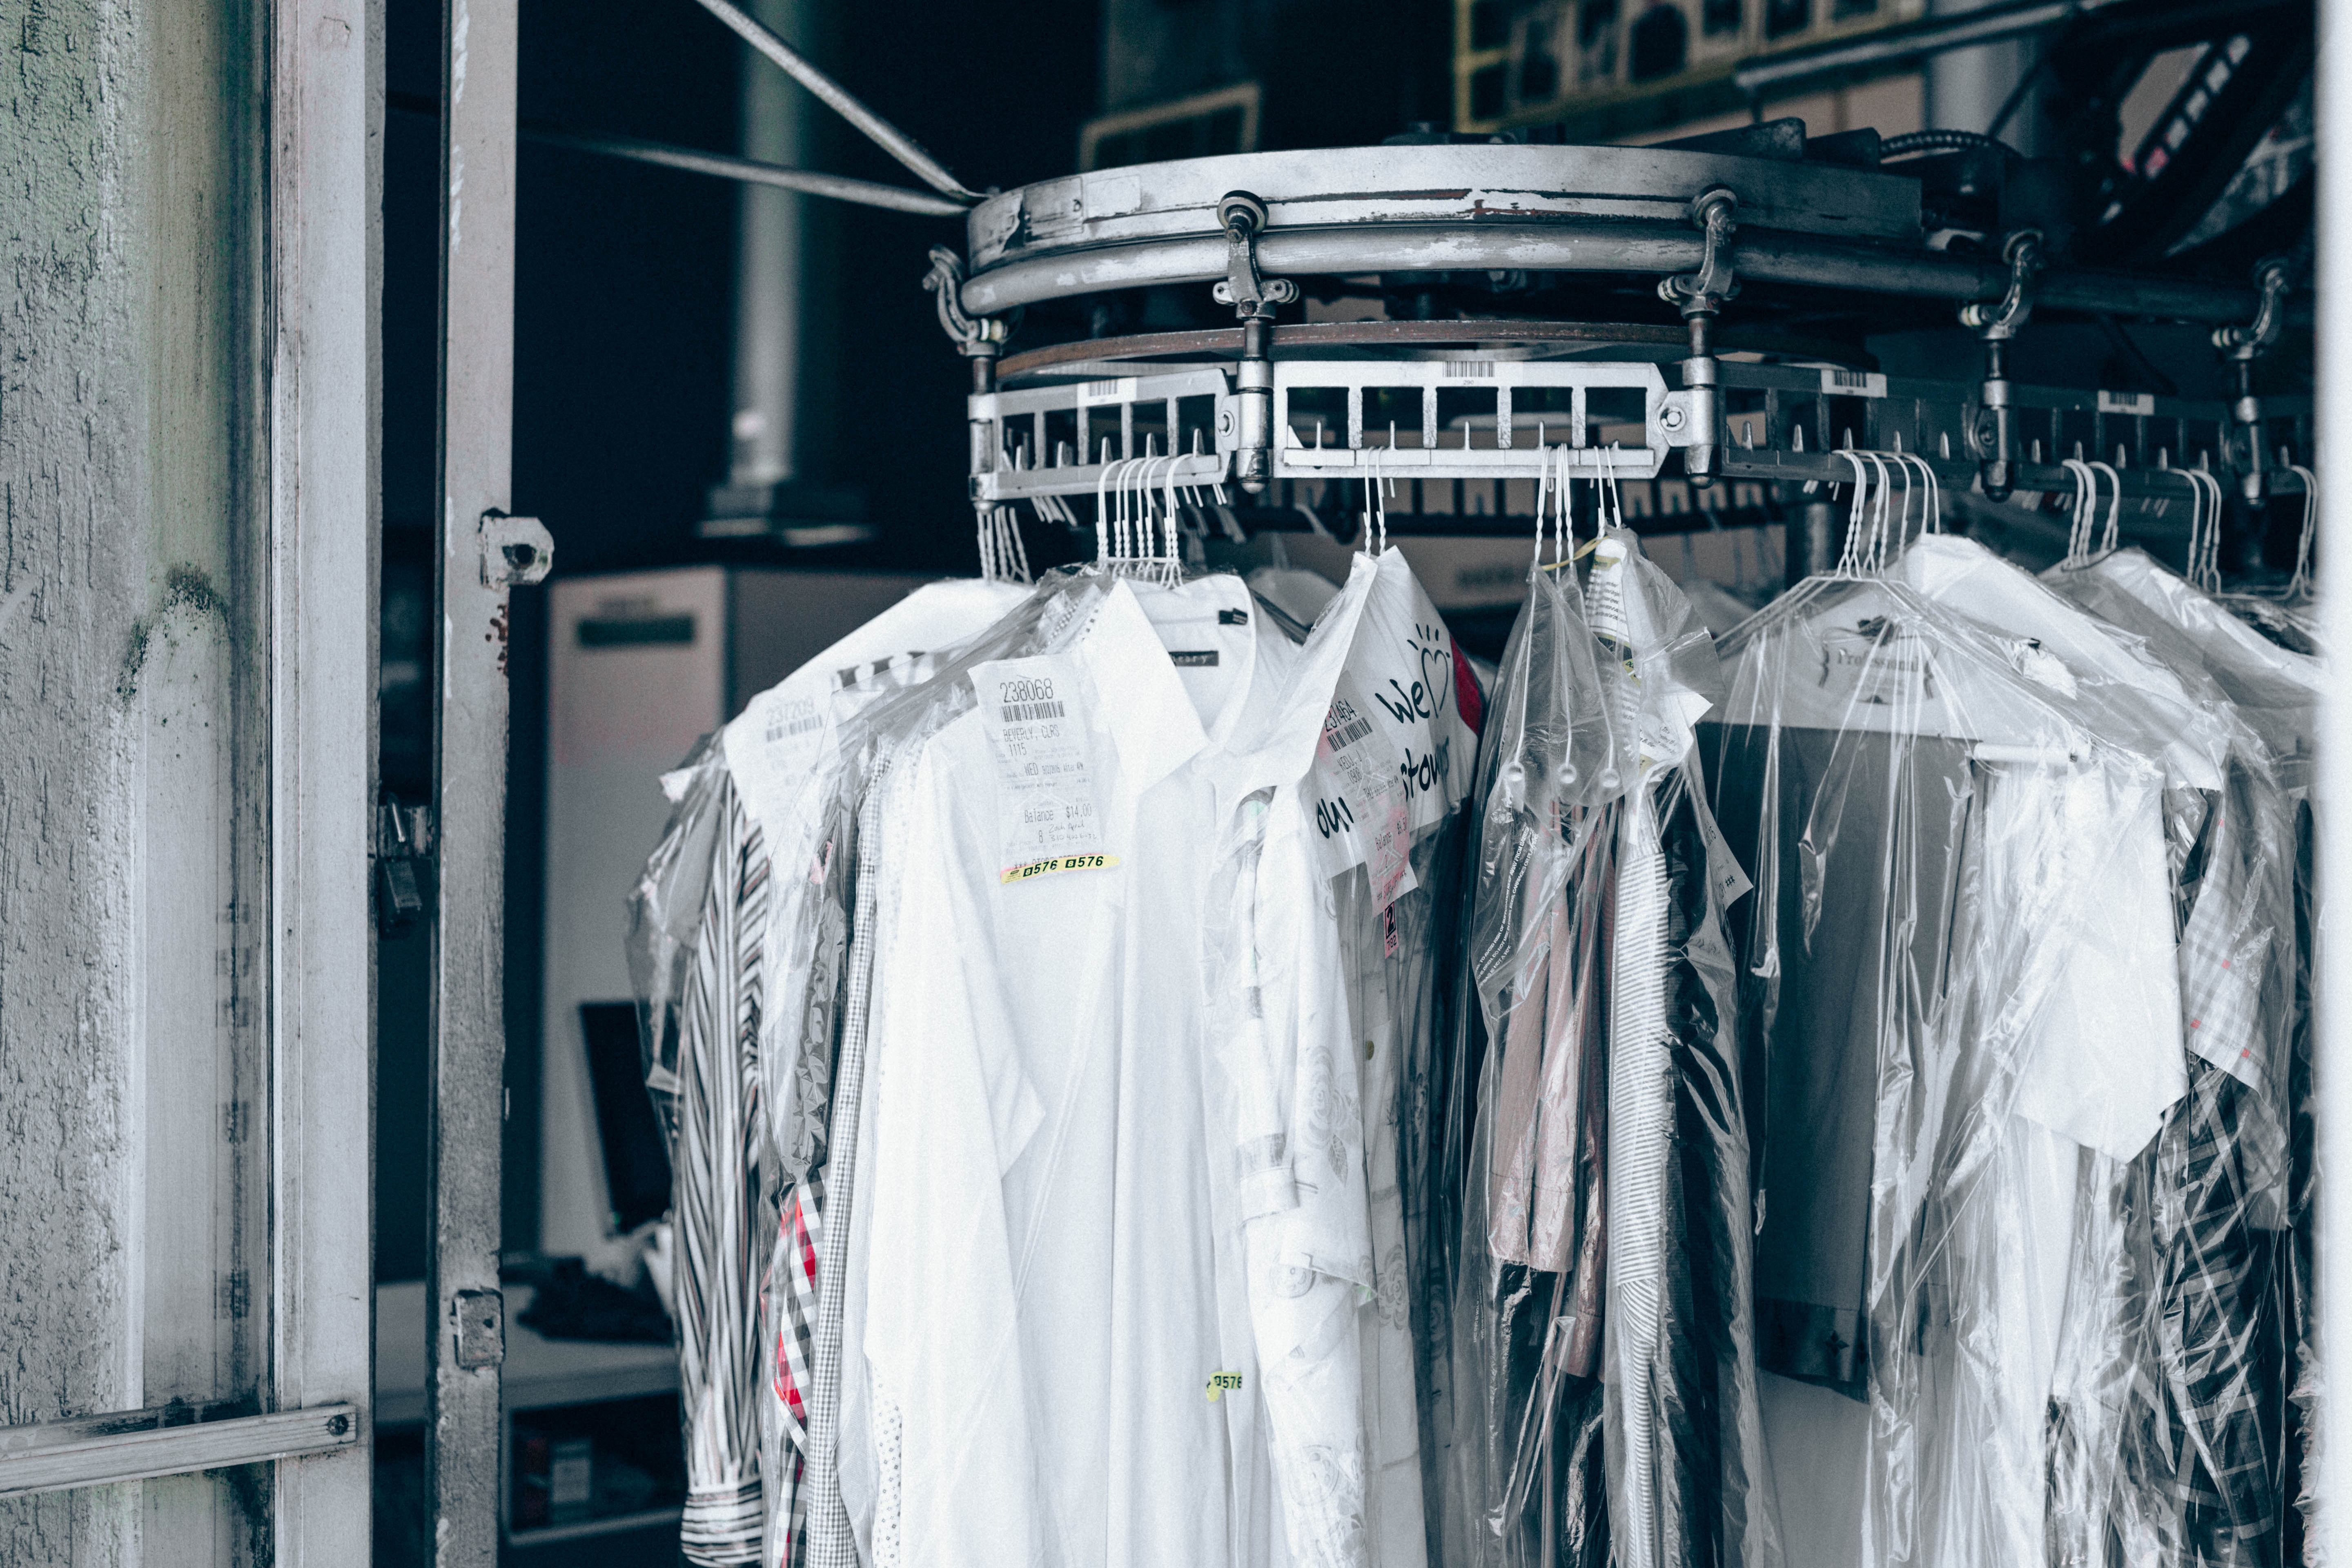 Dry cleaning is different from laundry cleaning but both are effective